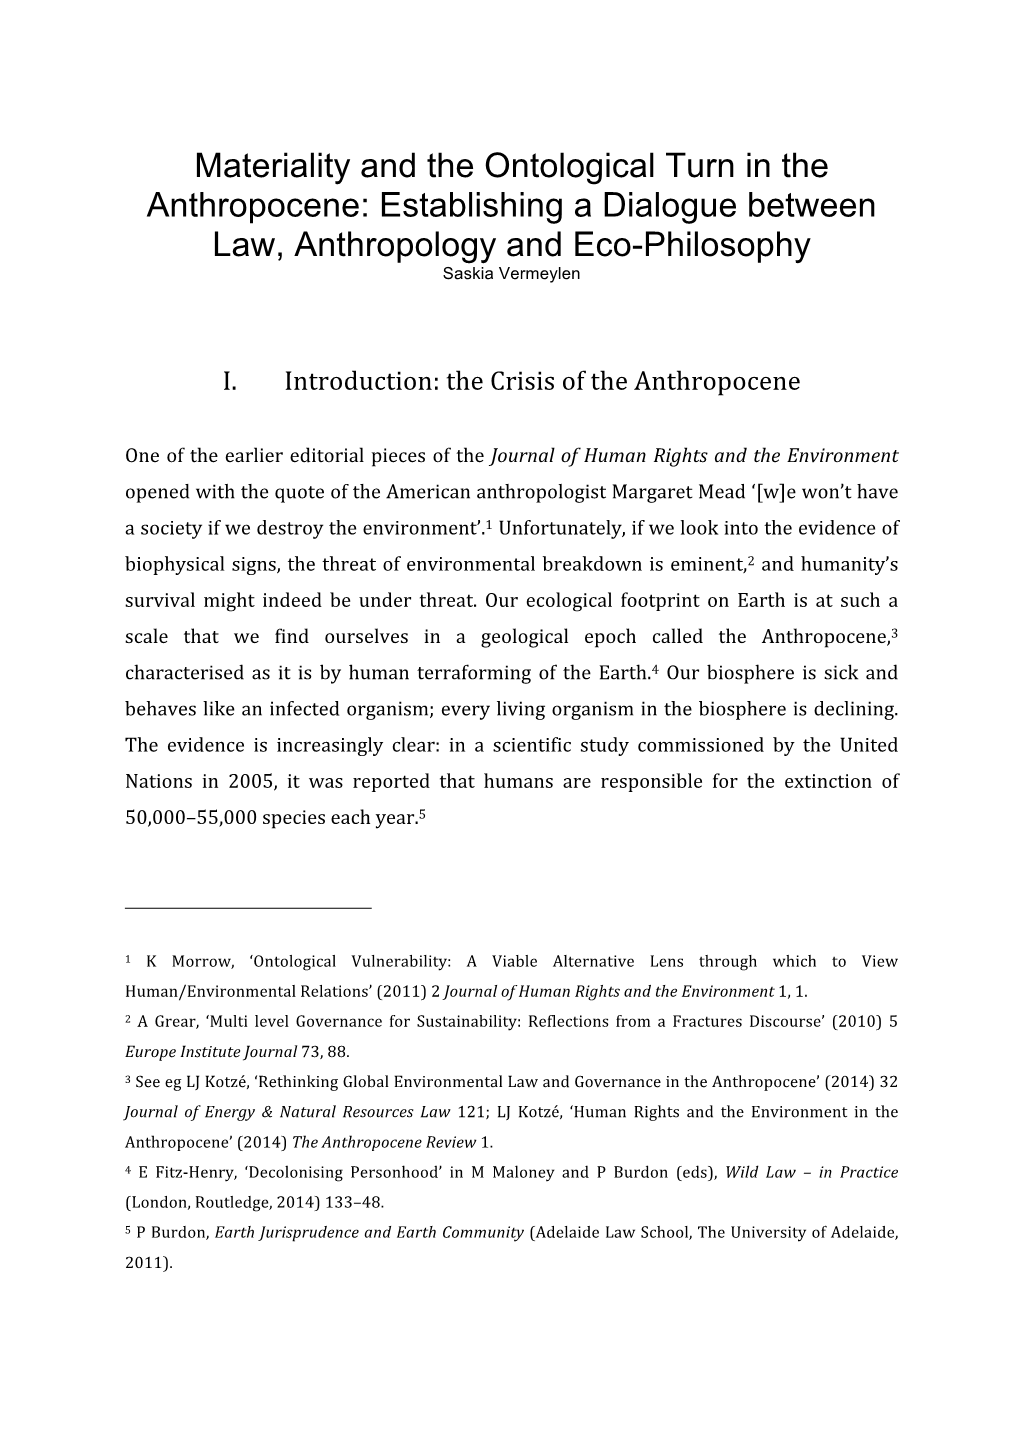 Materiality and the Ontological Turn in the Anthropocene: Establishing a Dialogue Between Law, Anthropology and Eco-Philosophy Saskia Vermeylen